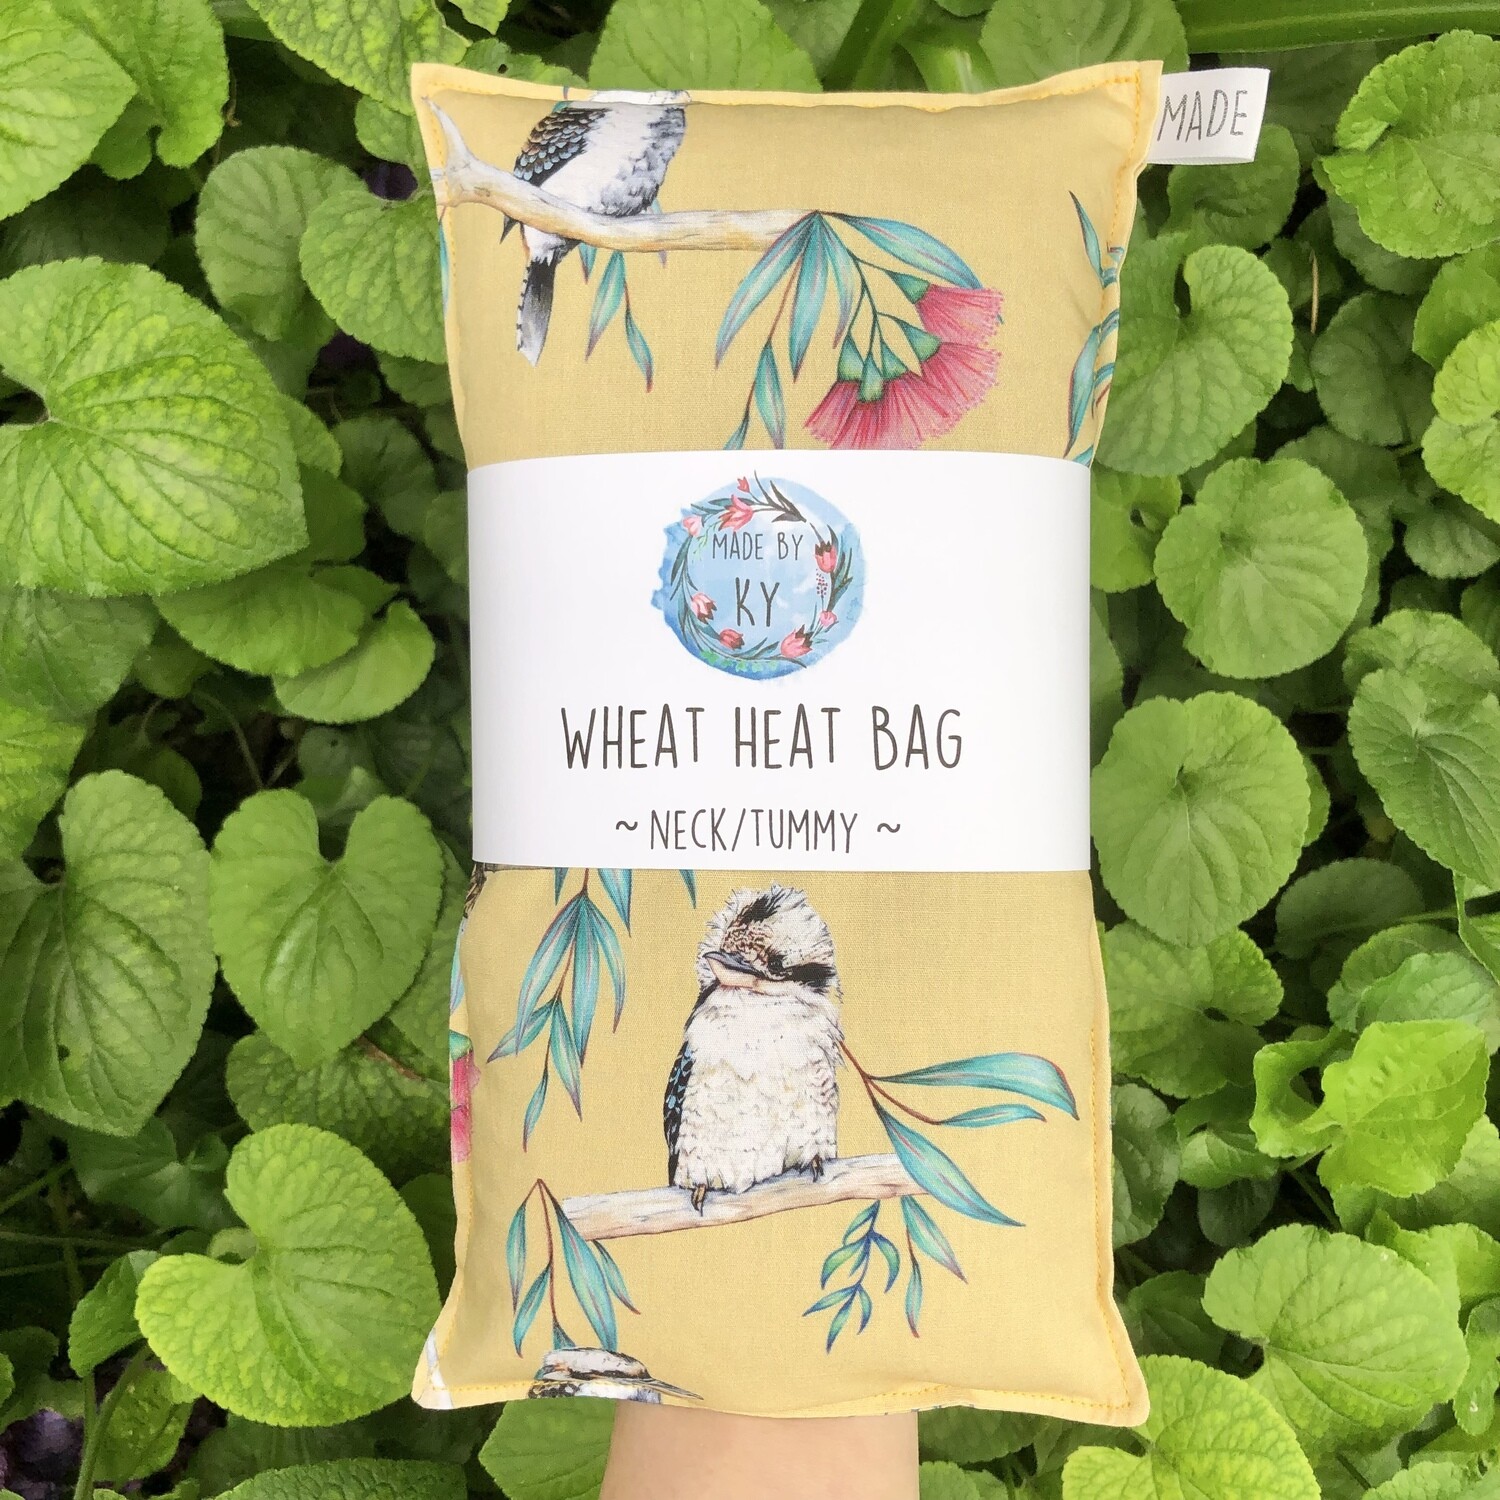 Sits in an Old Gum Tree - Wheat Heat Bag - Regular Size